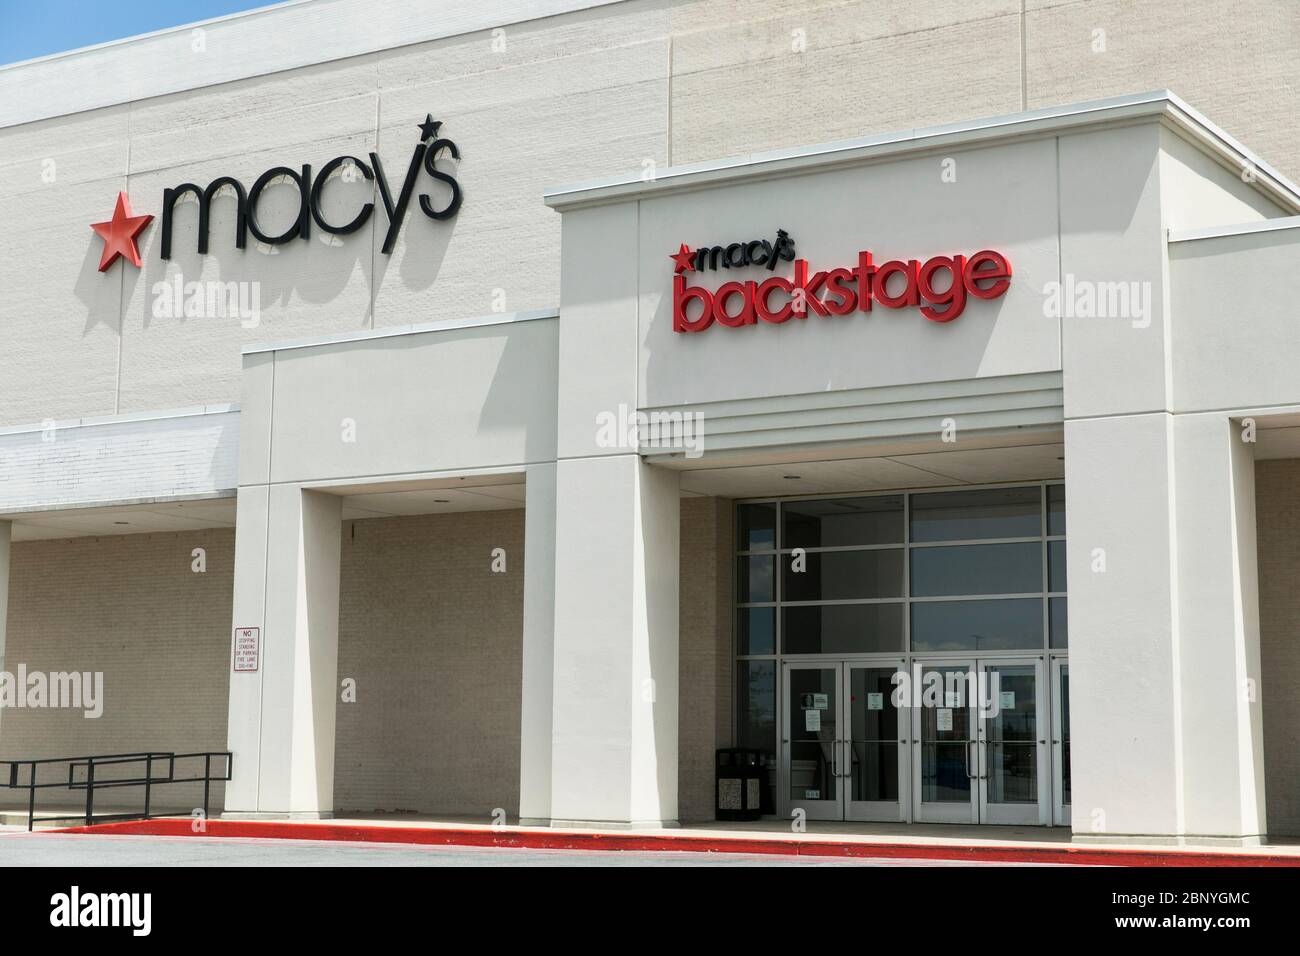 Logo signs outside of a Macy's and Macy's Backstage retail store locations in Harrisburg, Pennsylvania on May 4, 2020. Stock Photo